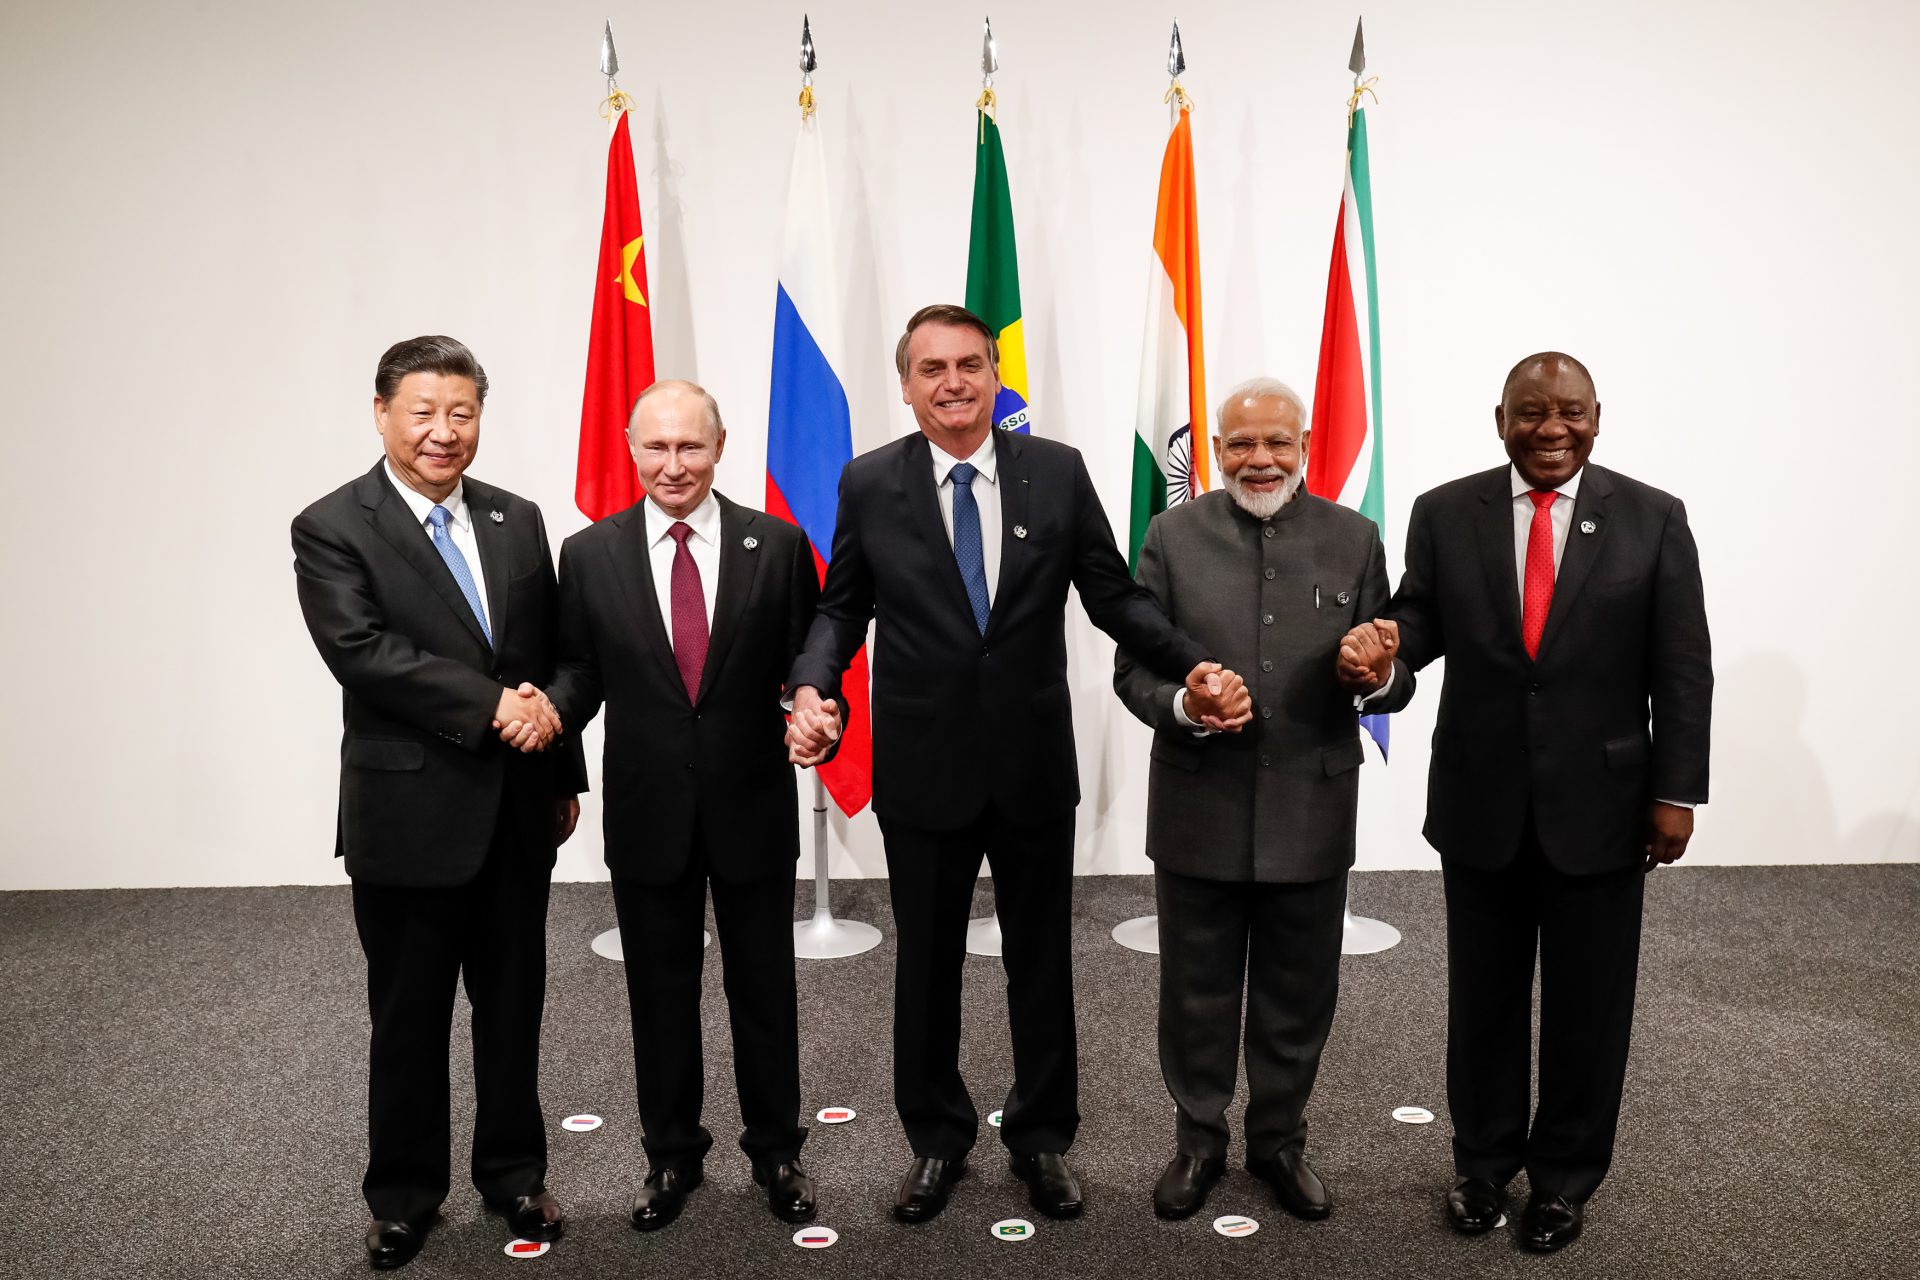 How Many Countries Accept Brics Currency?